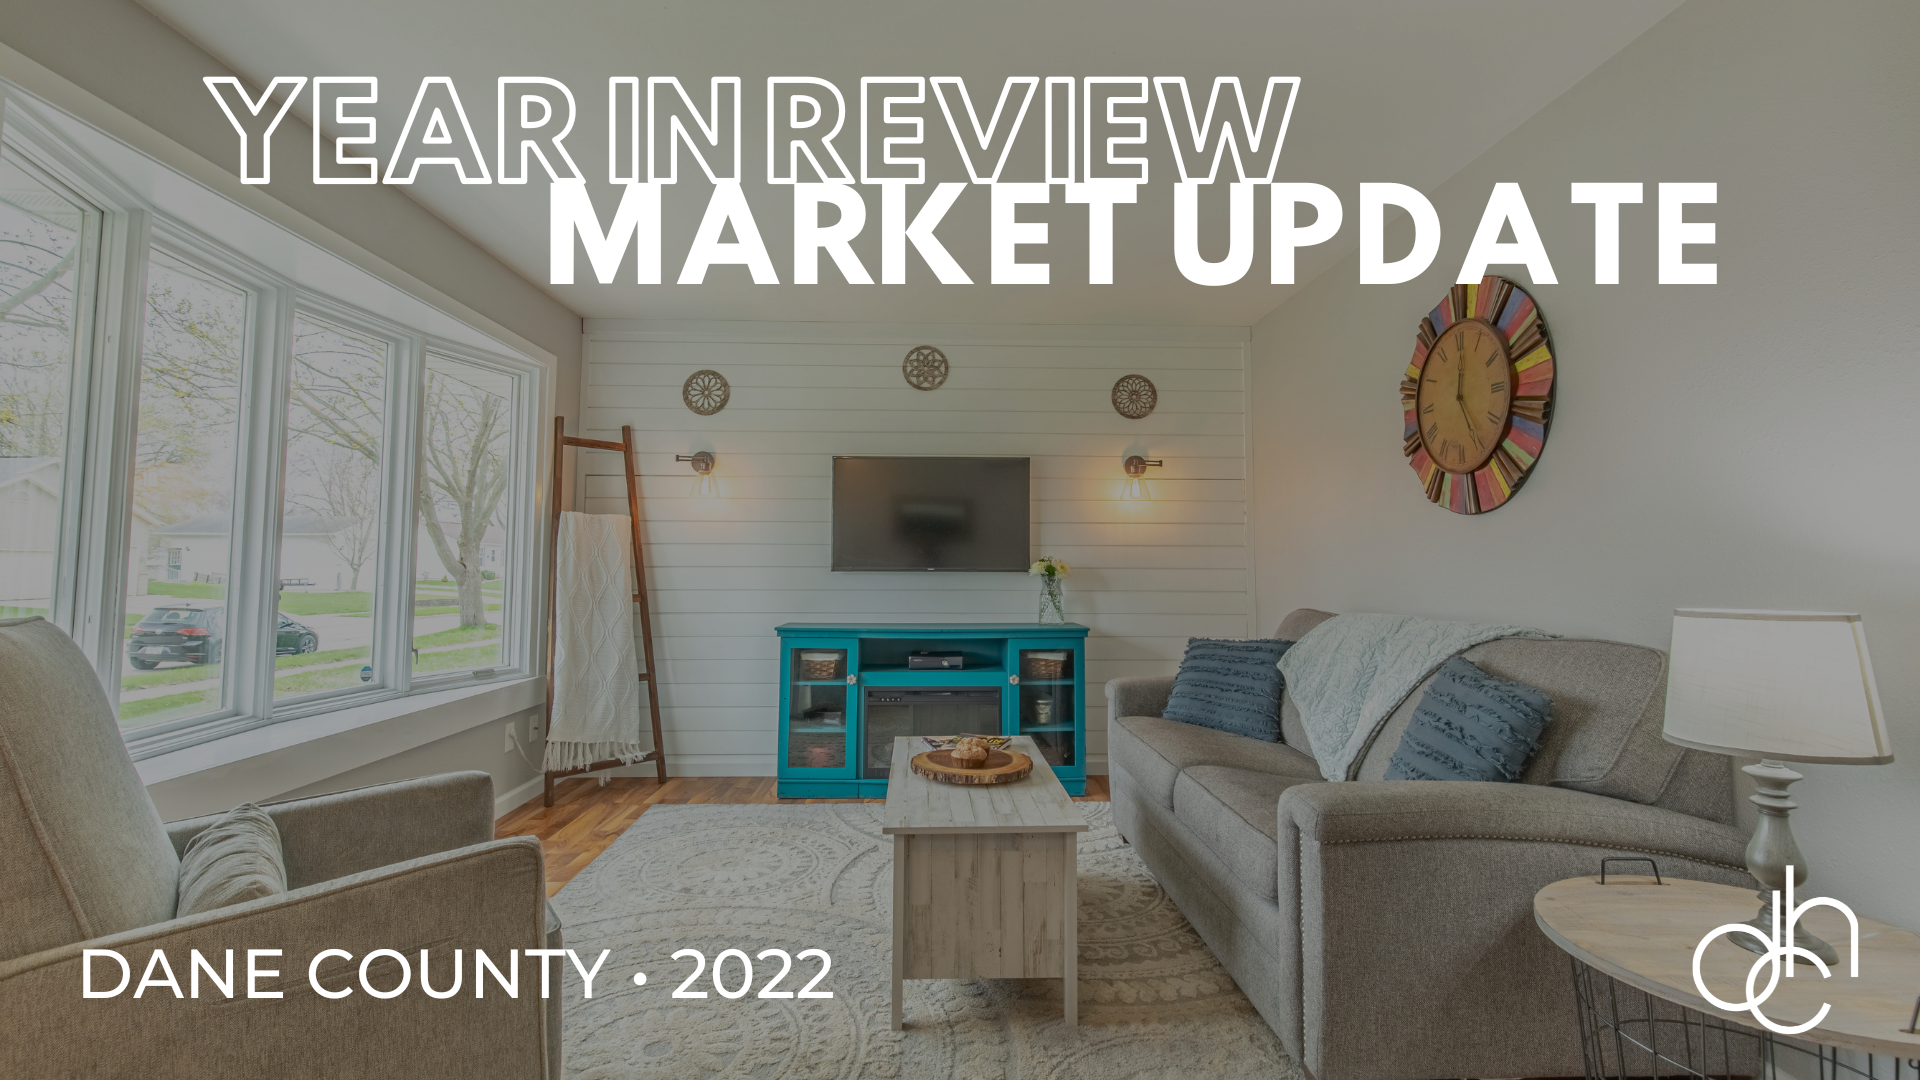 Dane County Year in Review Market Update 2022